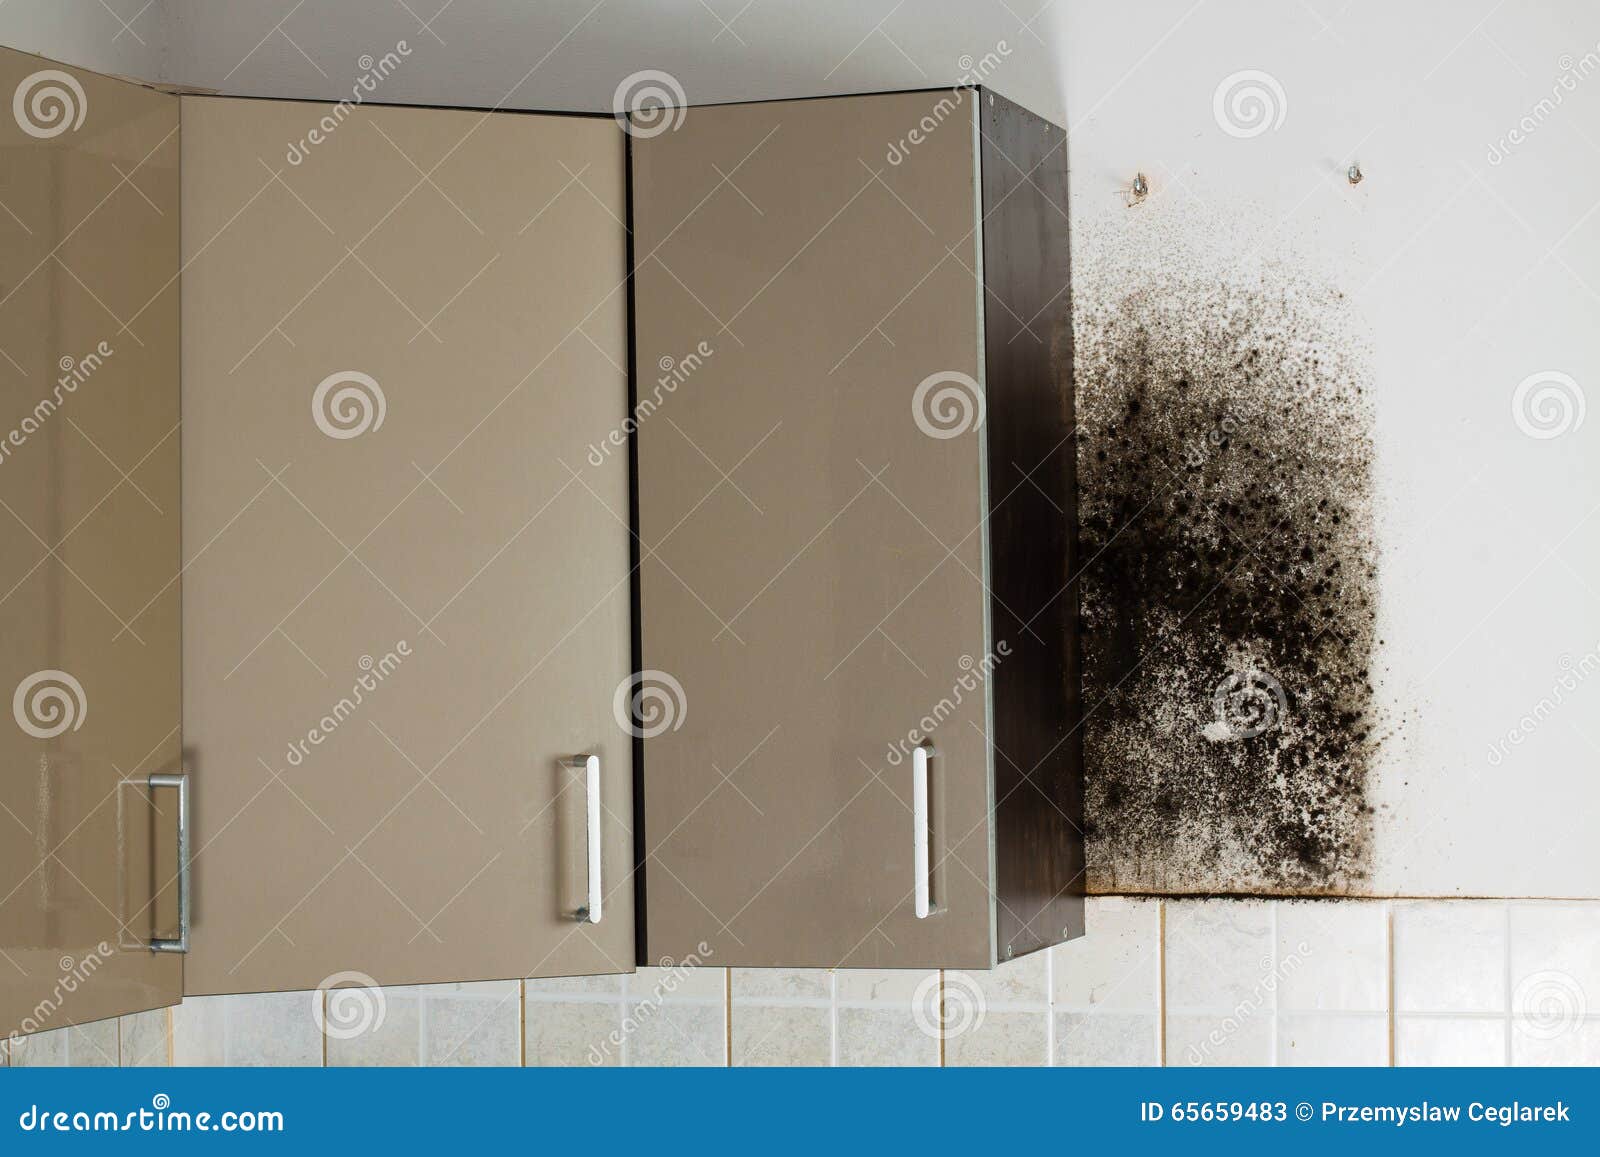 Black Mould Stock Image Image Of Interior Behind Cabinets